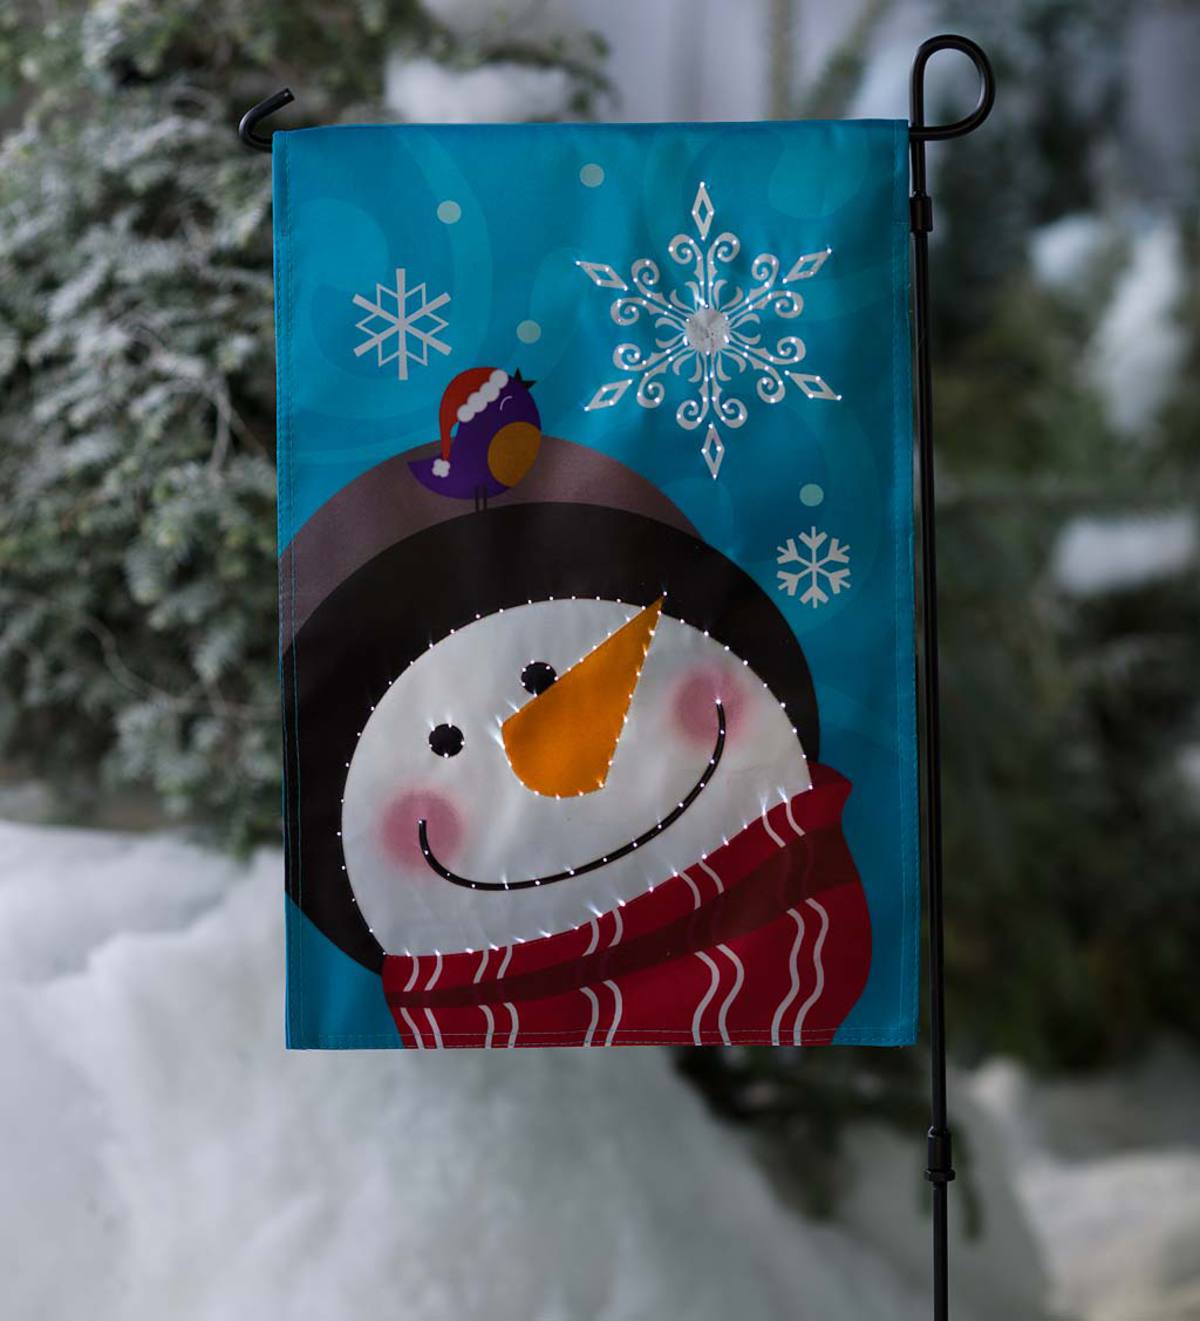 Details about   U choose full sz yard decorative flags Christmas winter holiday Greetings 25x38